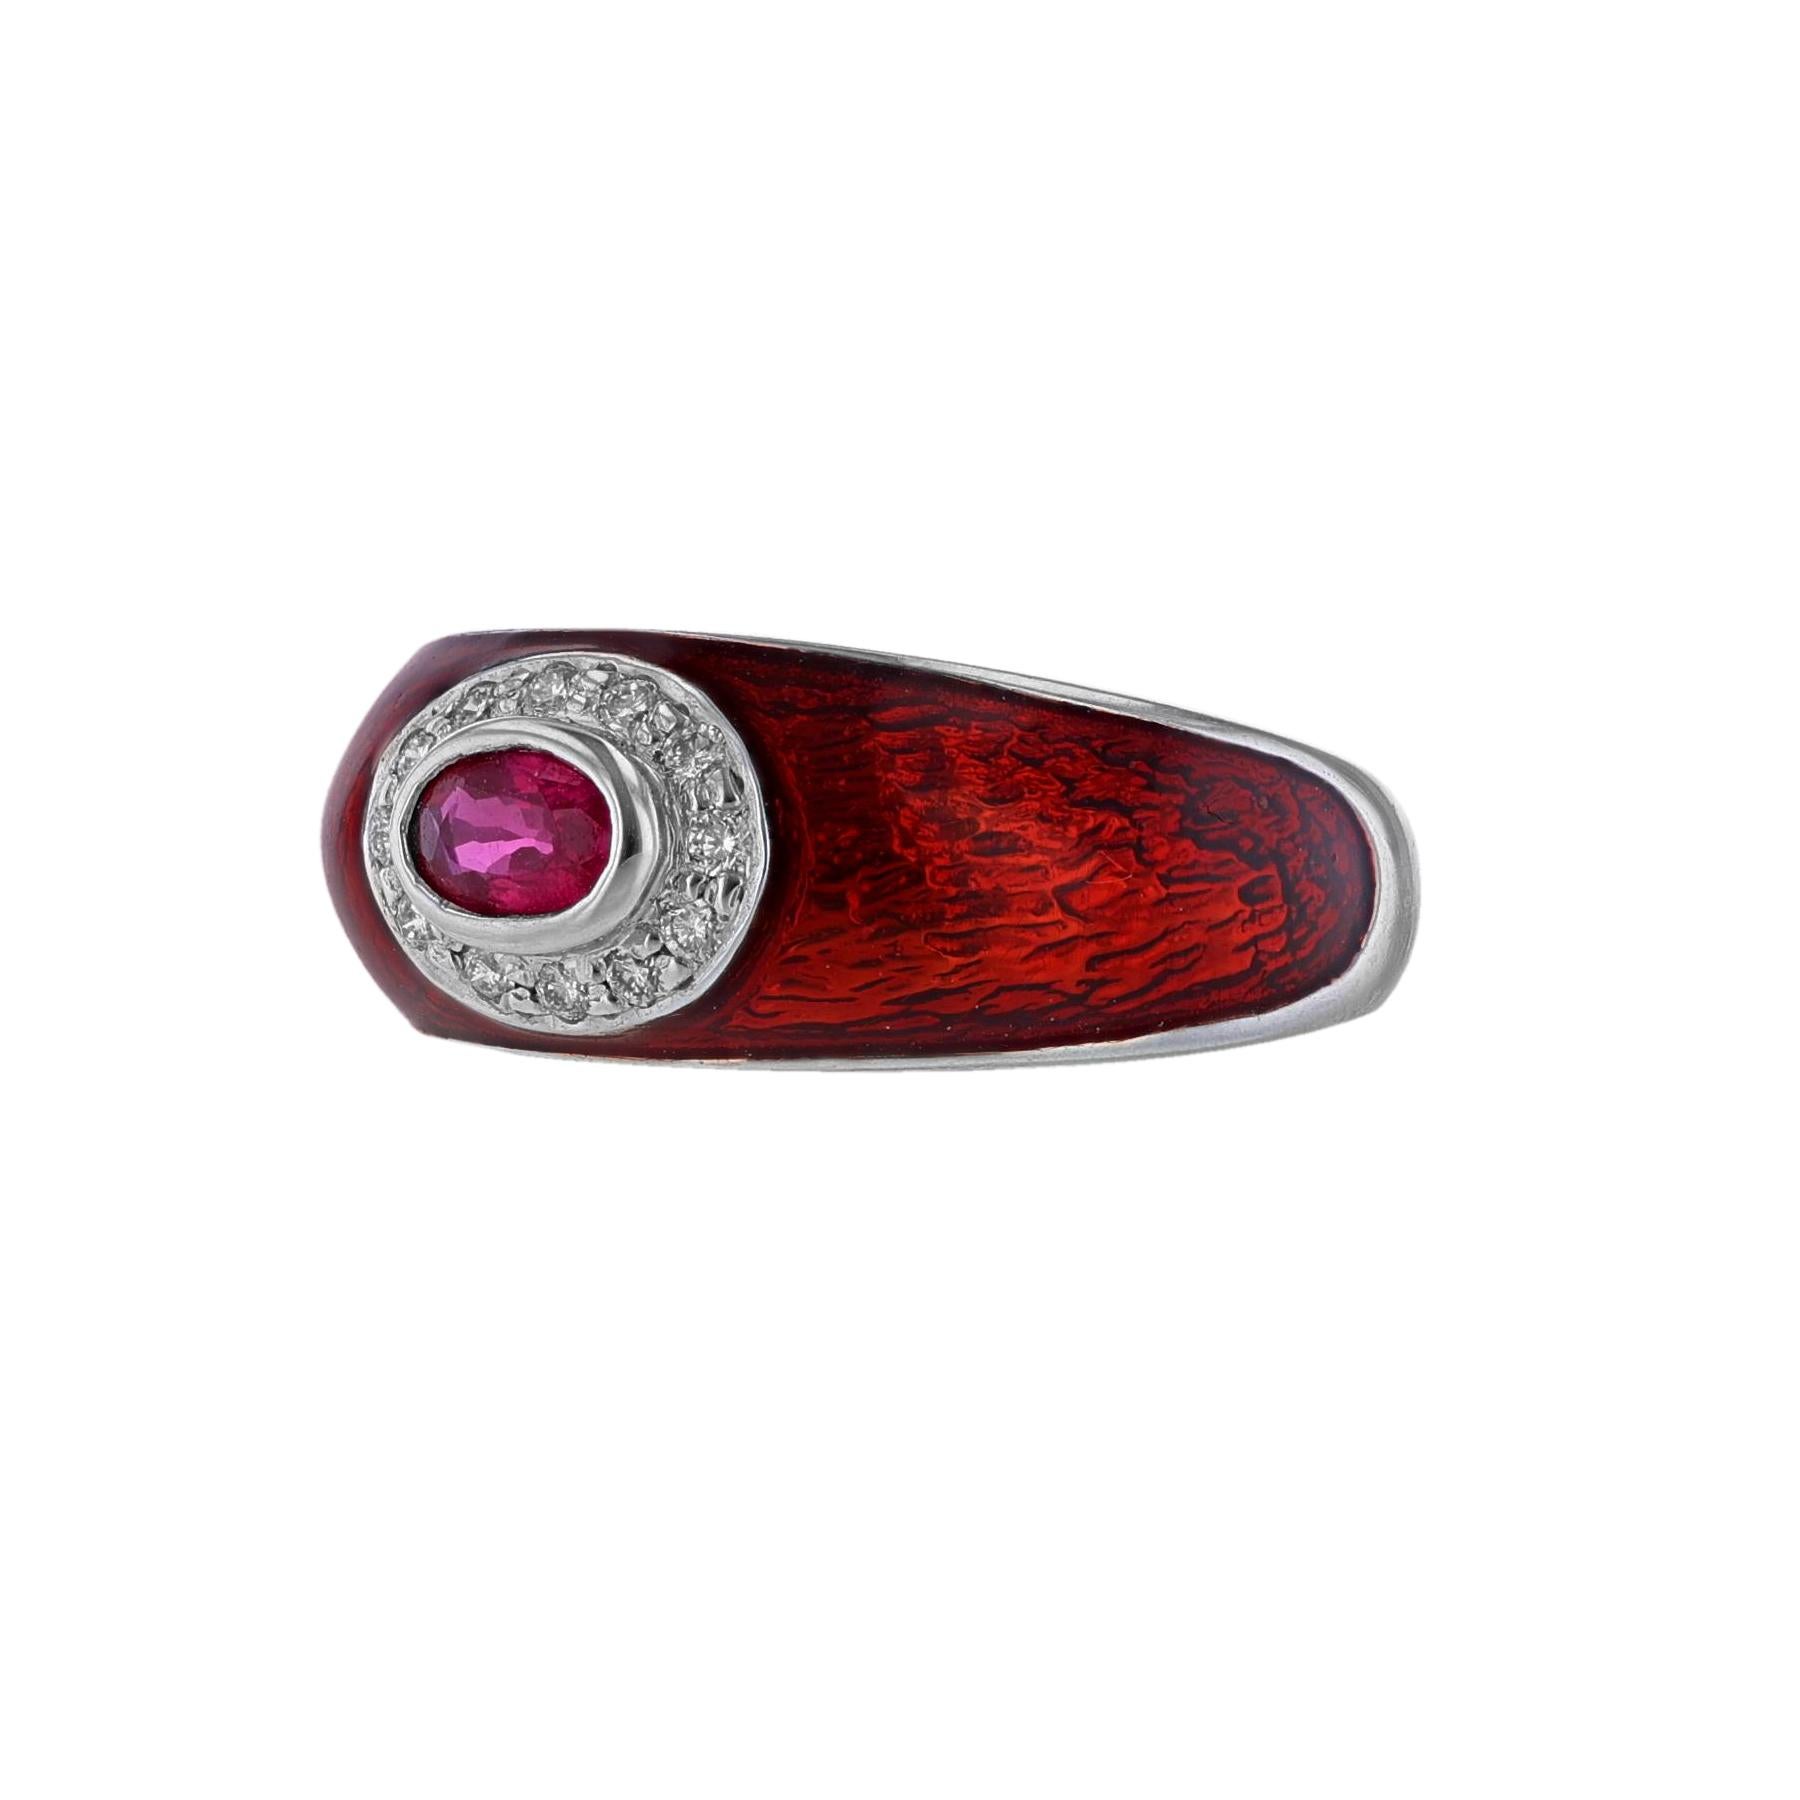 This ring is made in 18K white gold and red enamel. It features a center oval shape ruby, 3x5mm. Along with 12 round cut diamonds weighing 0.12ct.